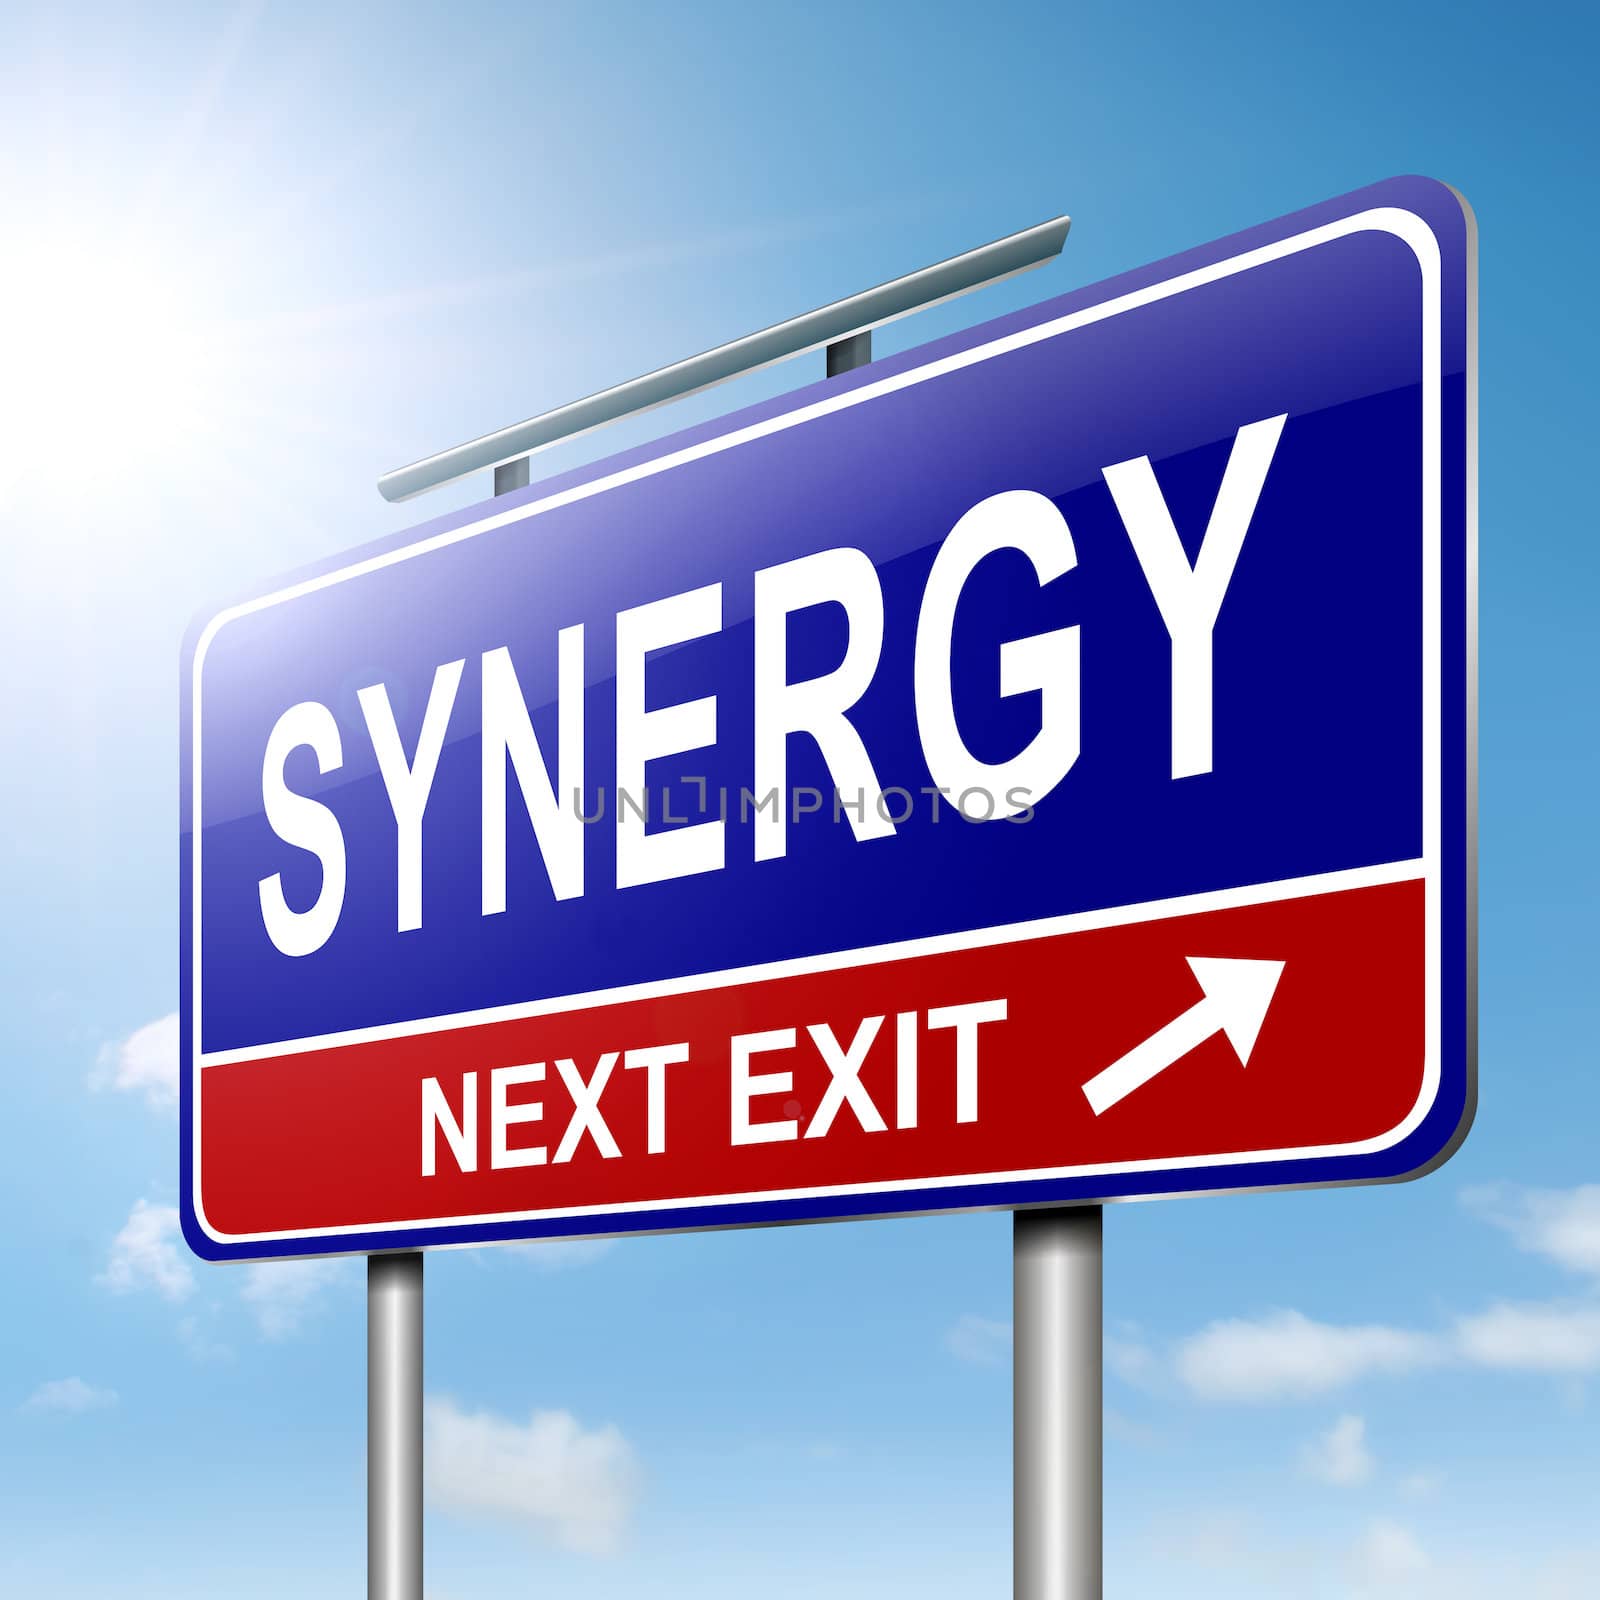 Illustration depicting a roadsign with synergy concept. Strong sunlight background.